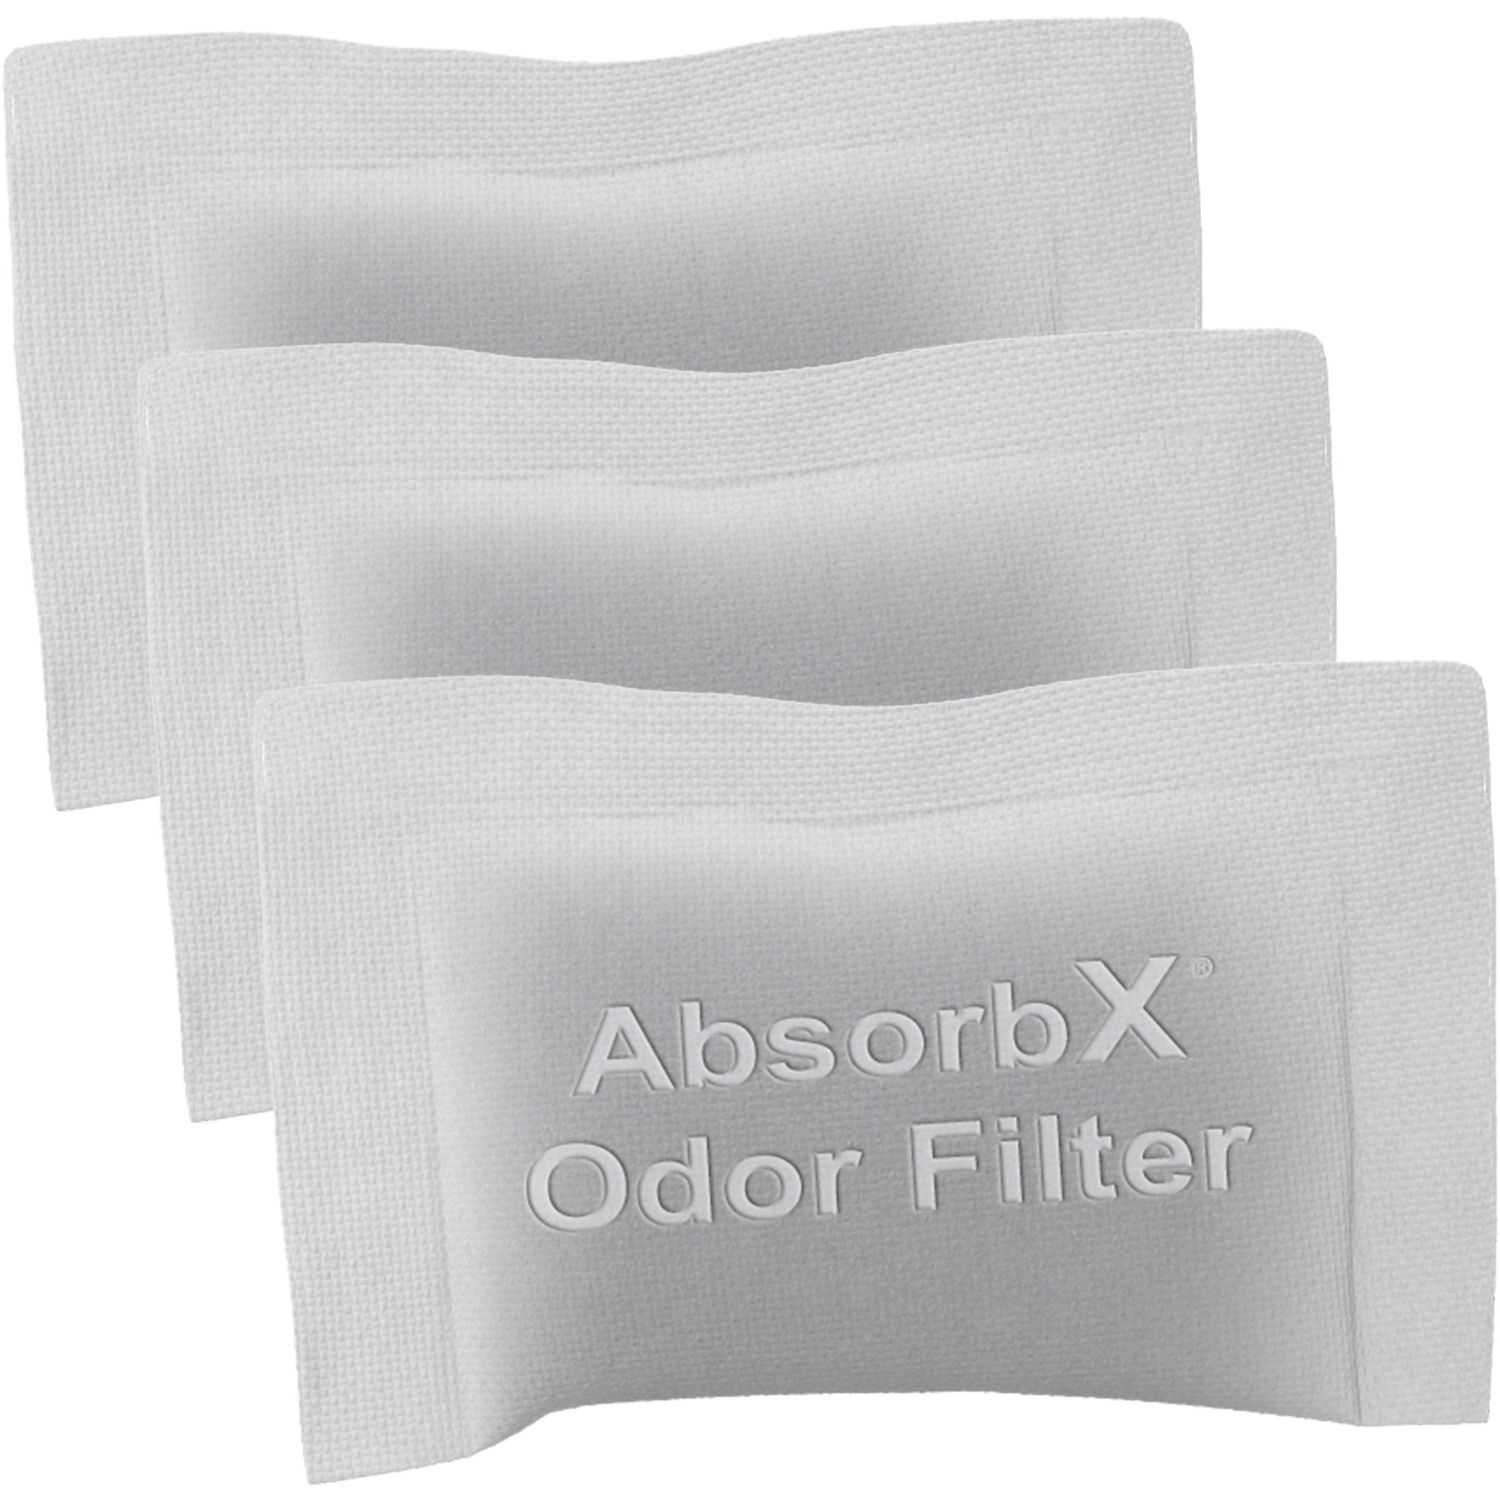 Air Filter Activated Carbon, For Trash Can, Remove Odor, Remove Volatile Organic Compound, Remove Chemicals, 0.3" Height x 3" Width x 4.5" Depth, Carbon